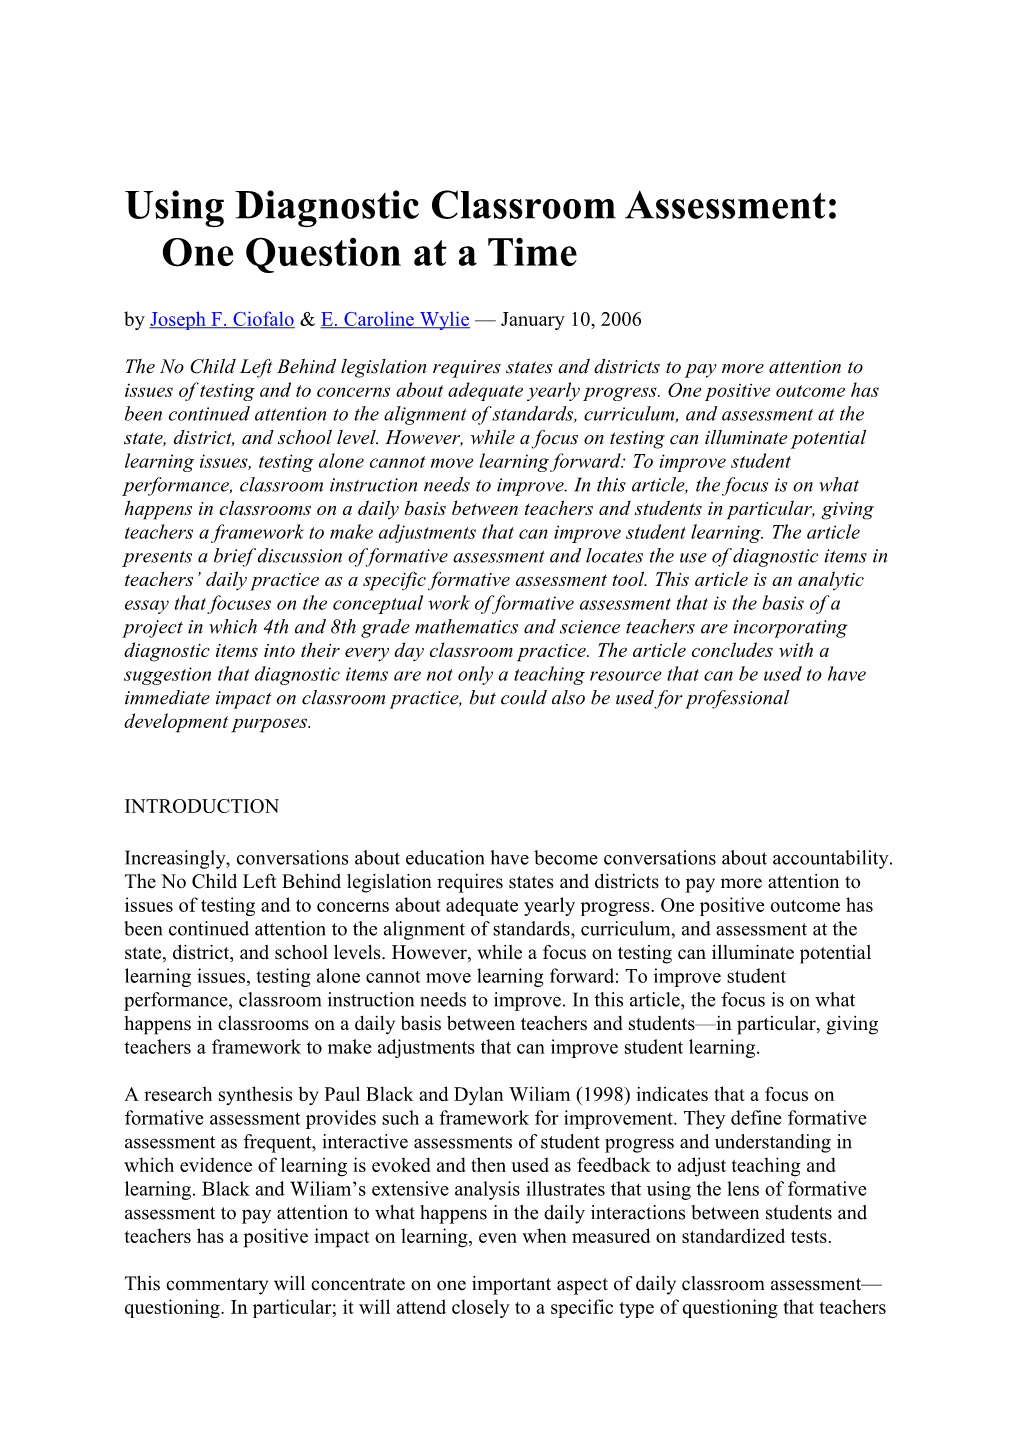 Using Diagnostic Classroom Assessment: One Question at a Time